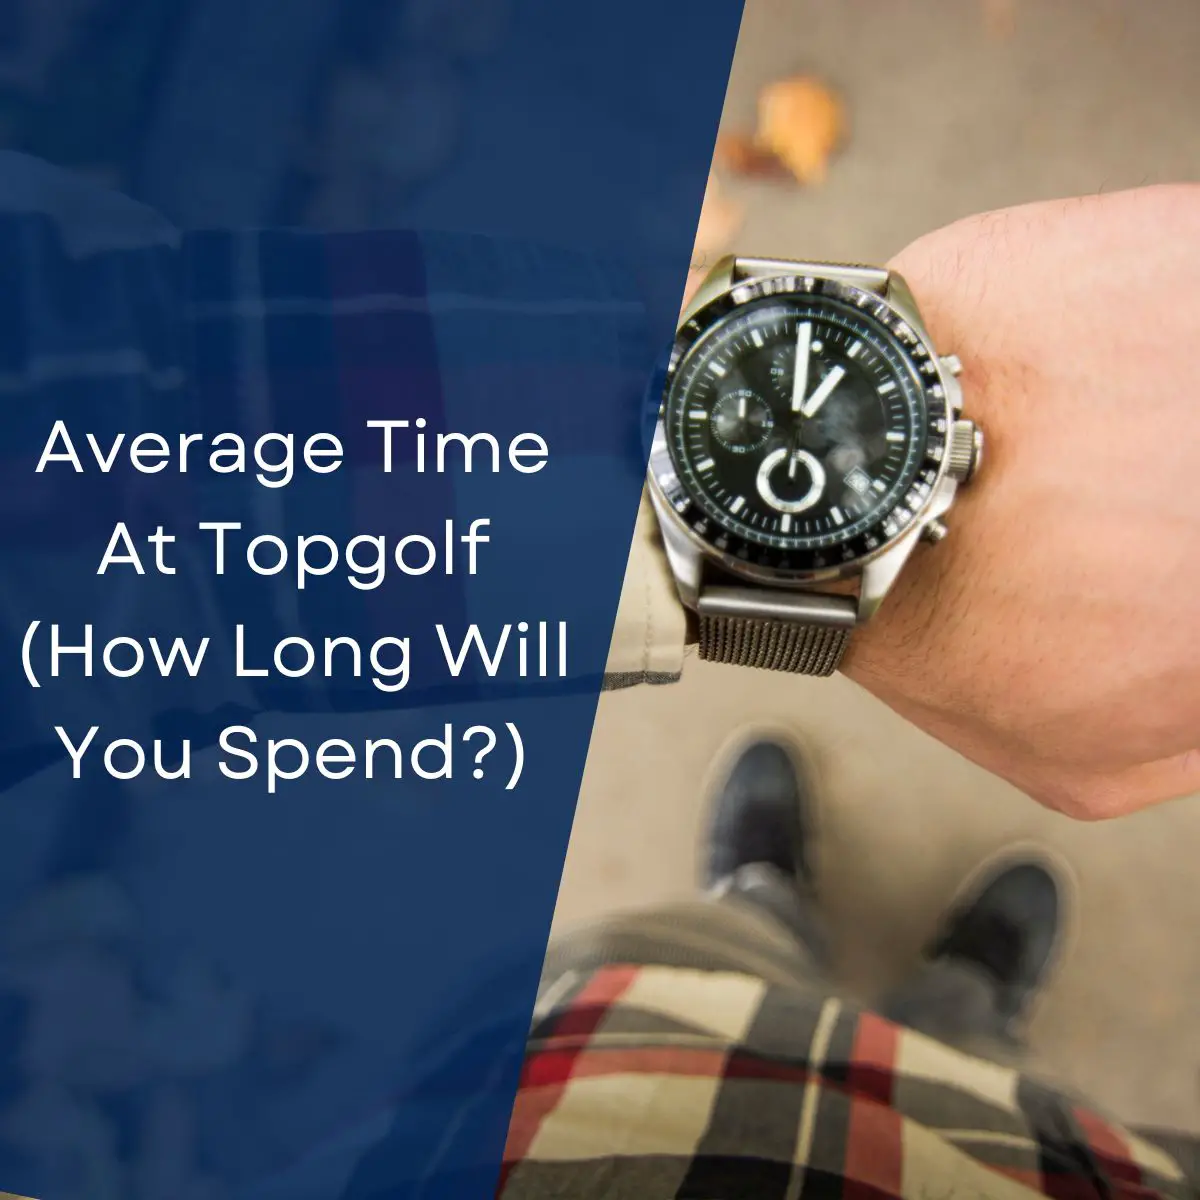 Average Time At Topgolf (How Long Will You Spend?)